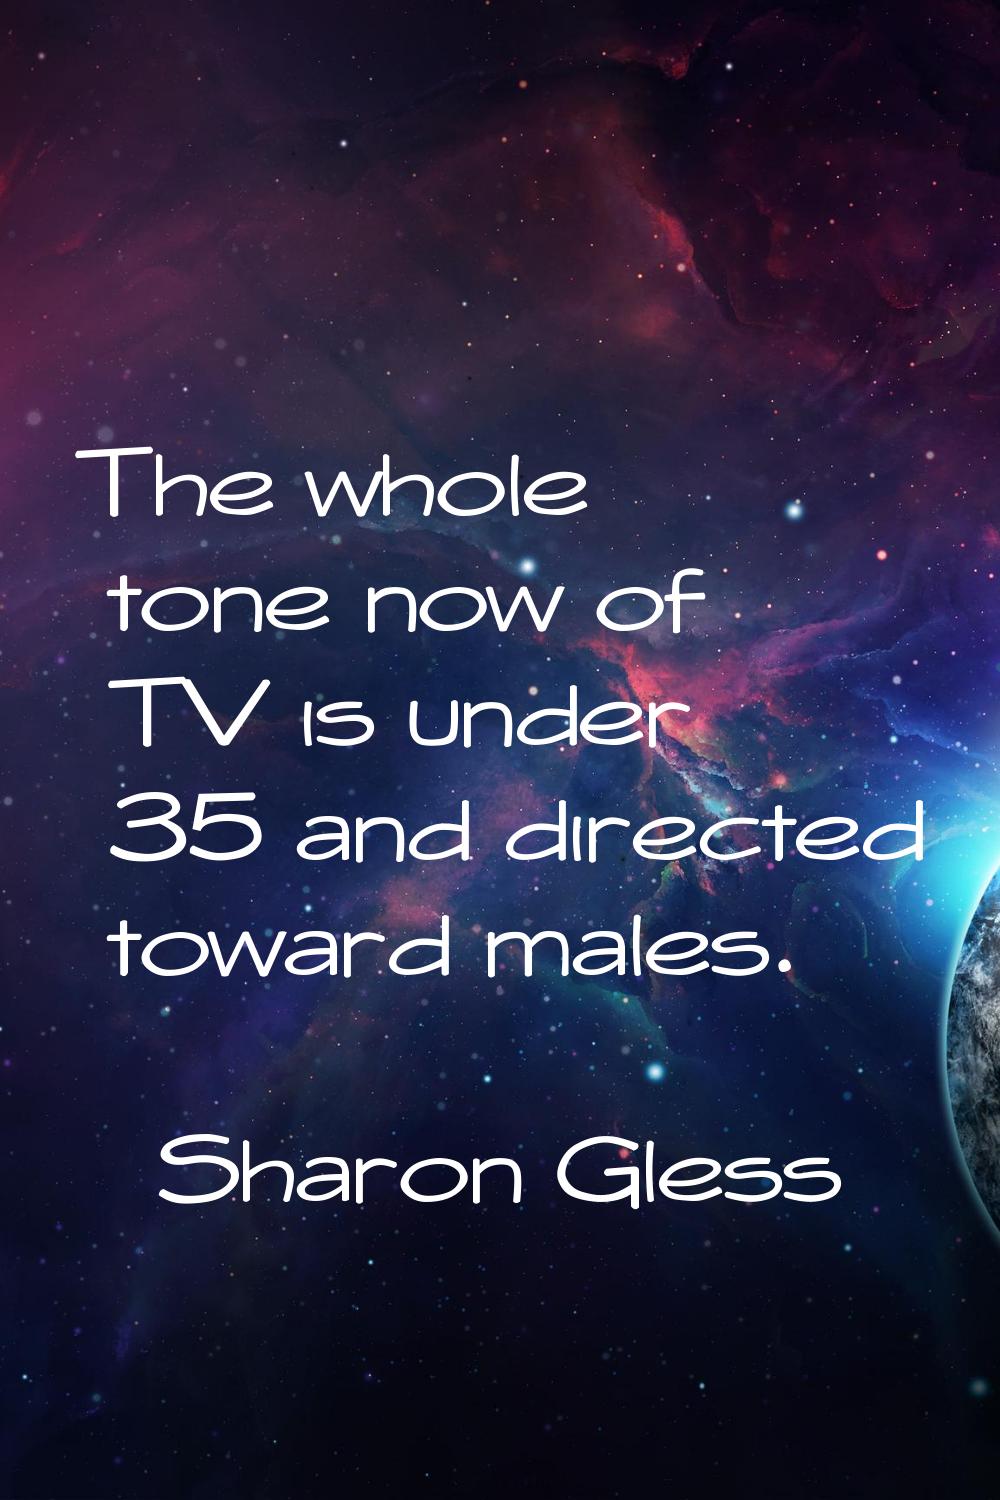 The whole tone now of TV is under 35 and directed toward males.